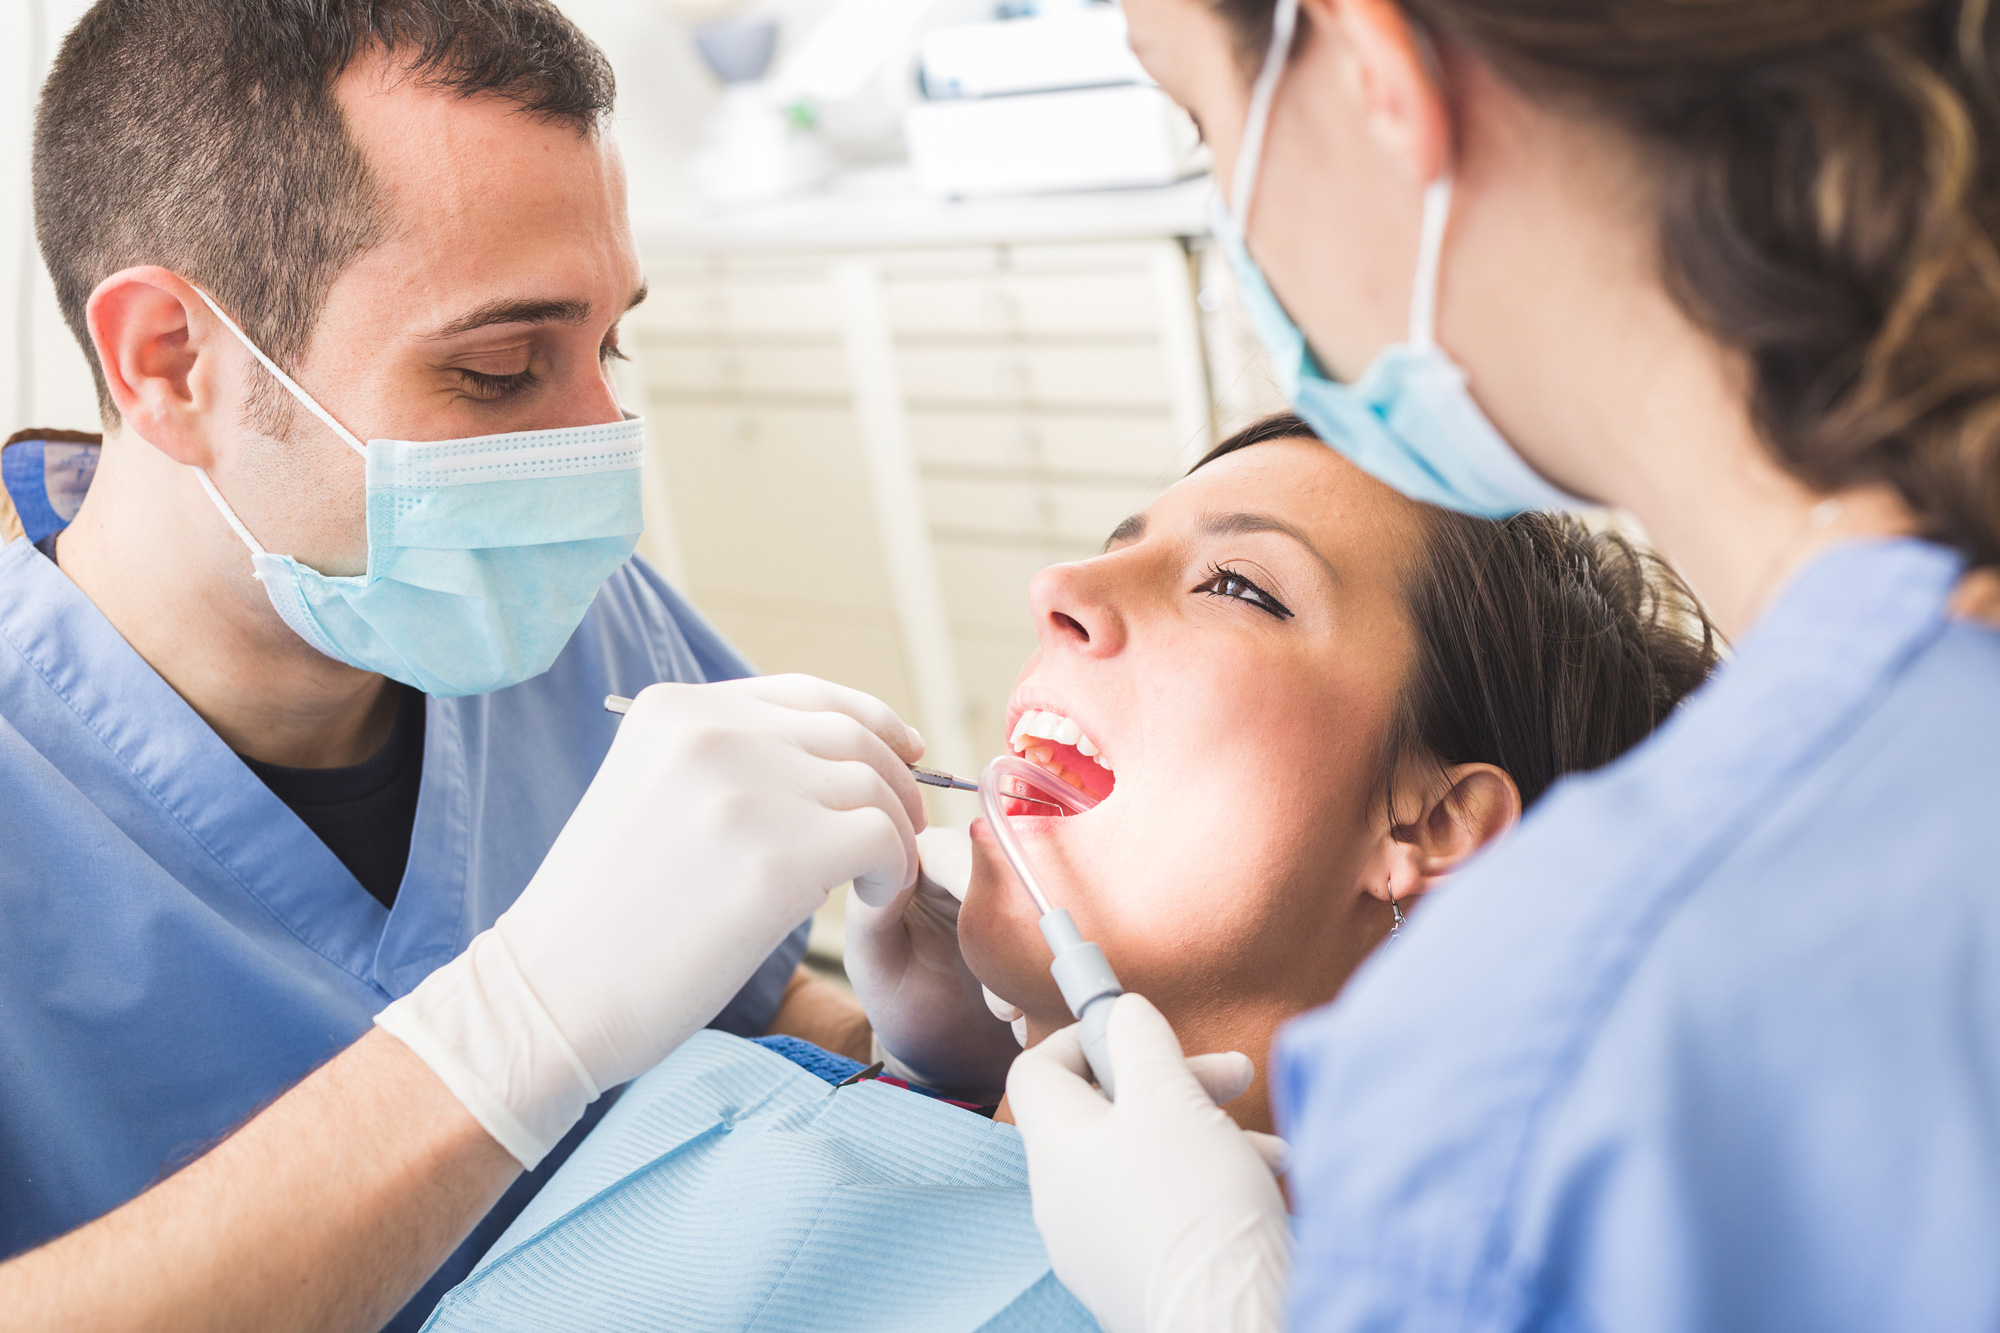 The Following Dental Procedures Are Performed By General Dentists